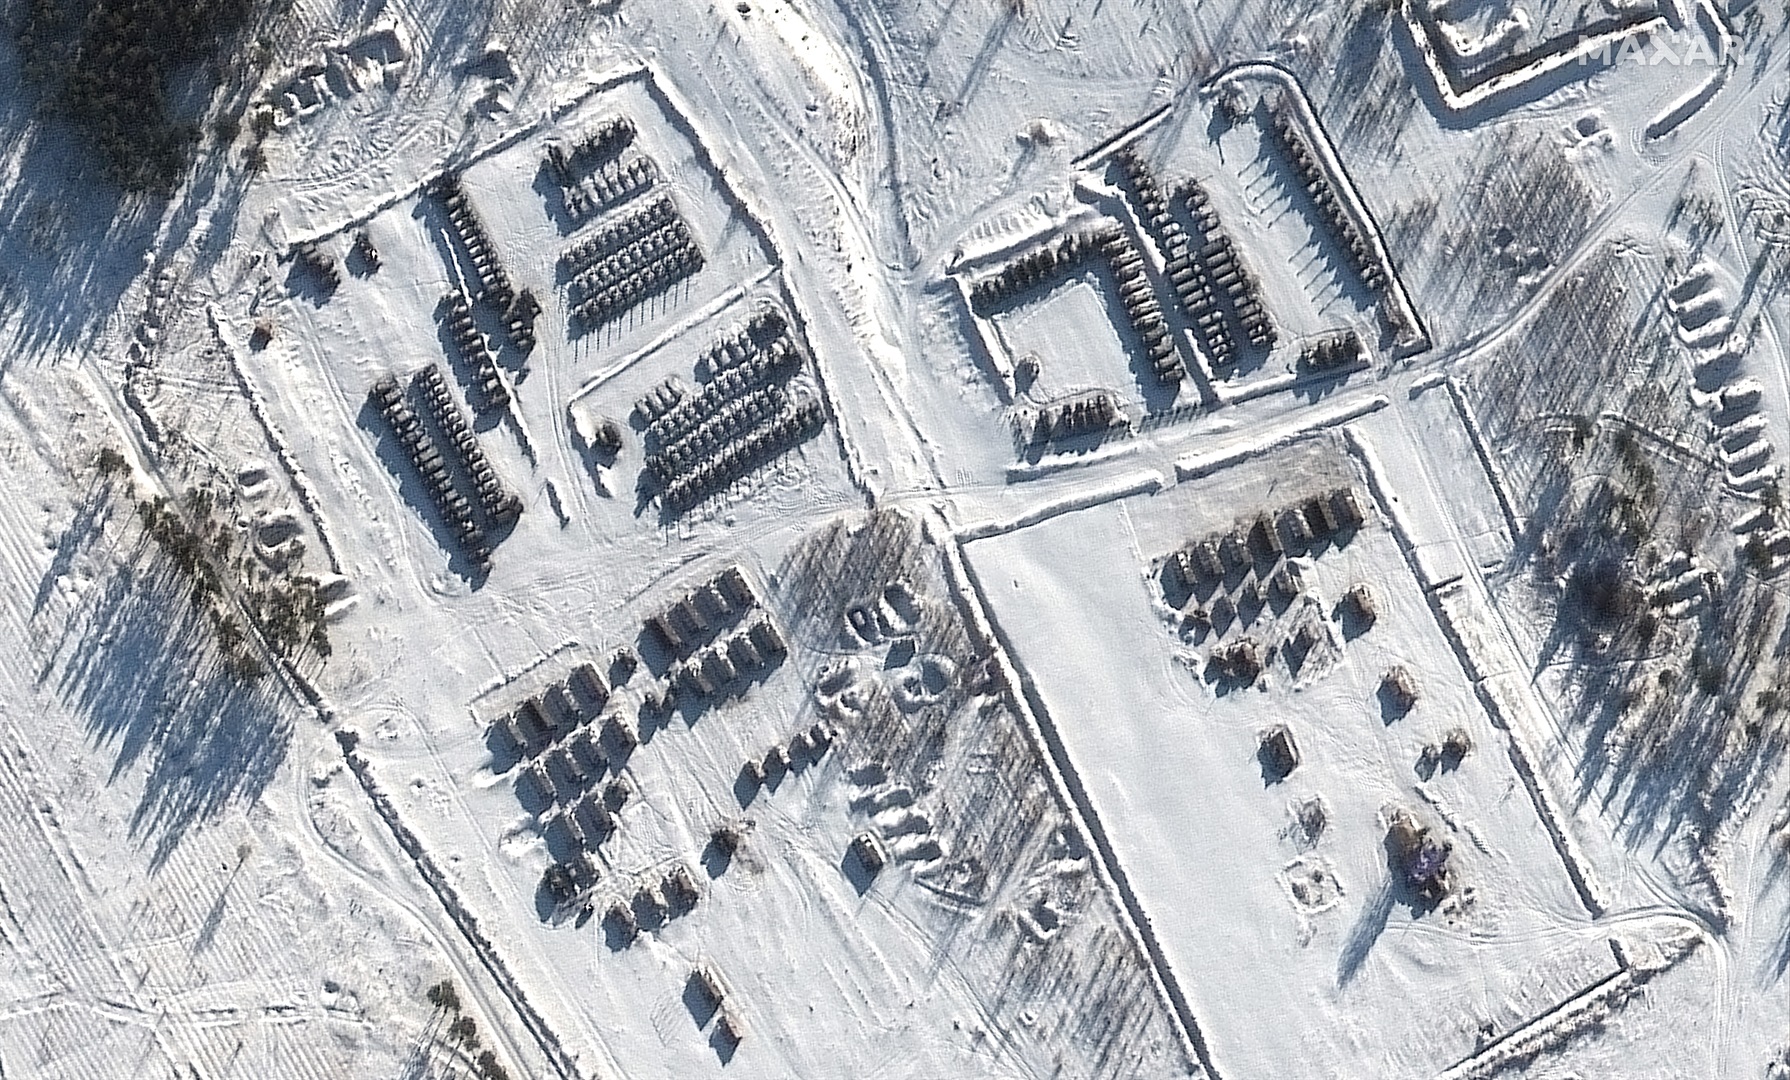 View of deployed battle groups at the Pogonovo training area in Russia. Satellite image ©2022 Maxar Technologies